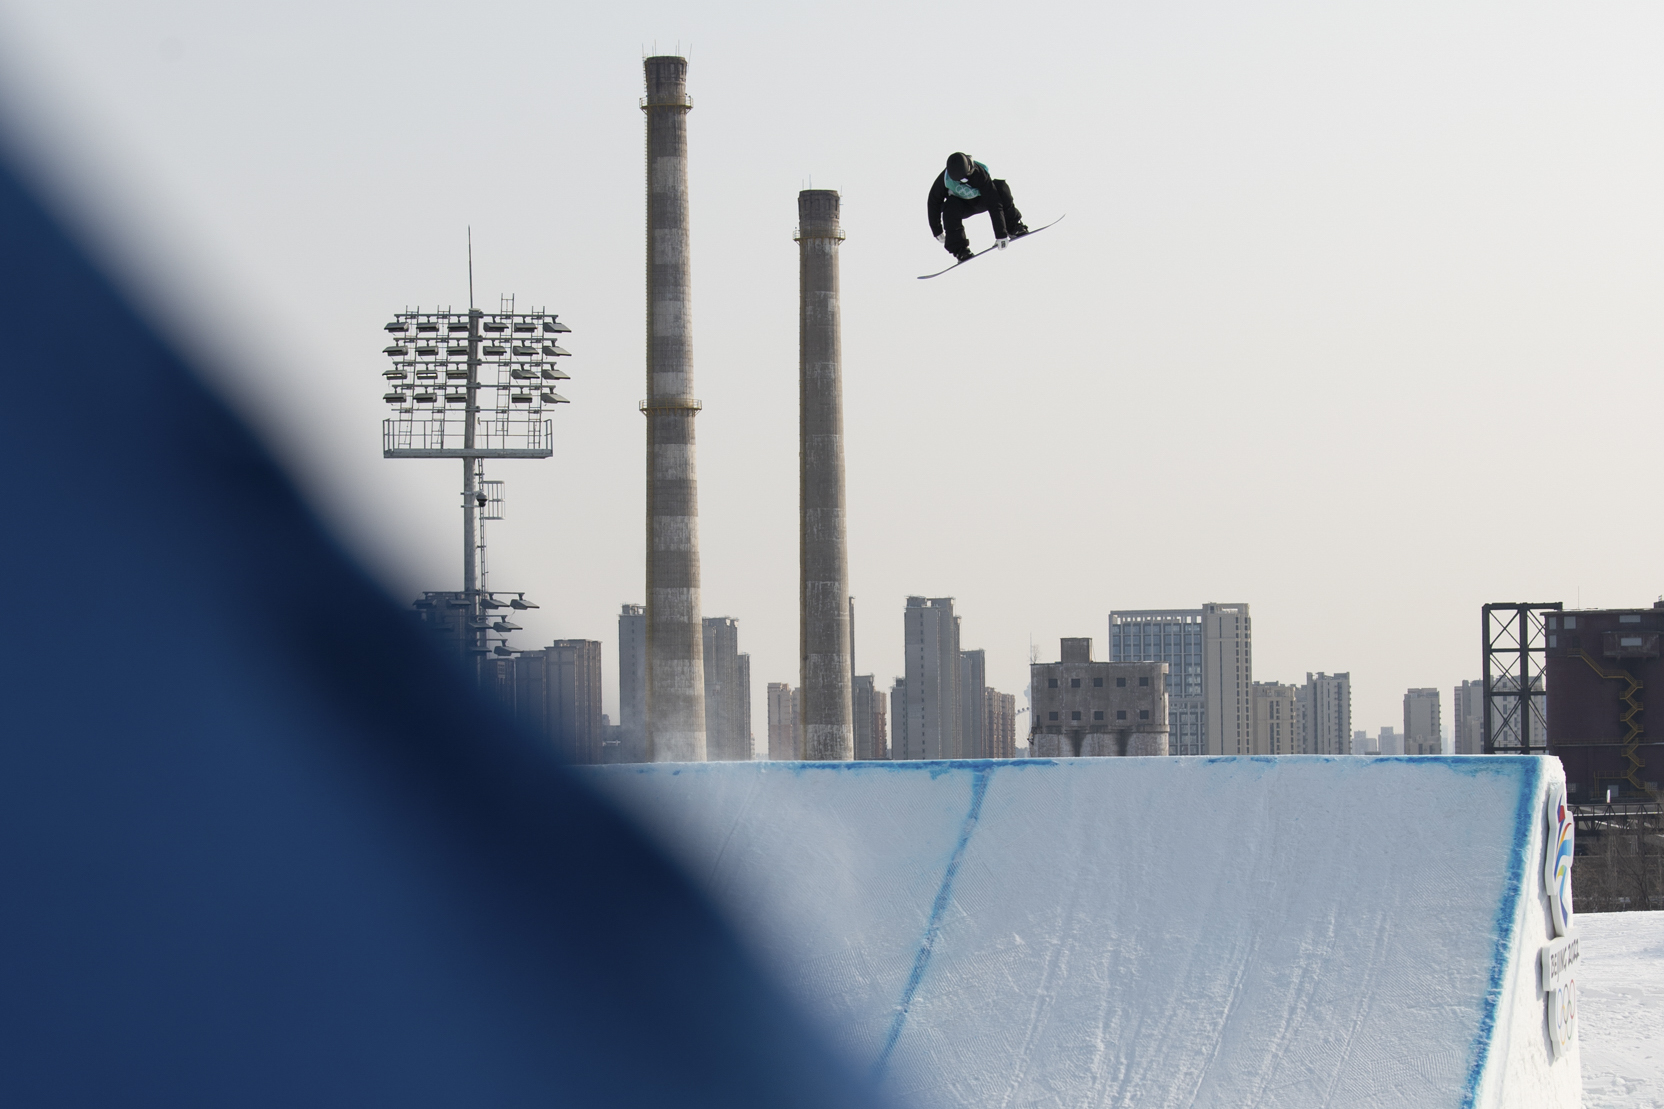 Is Contest Snowboarding About to Change? An Interview with the Overlords